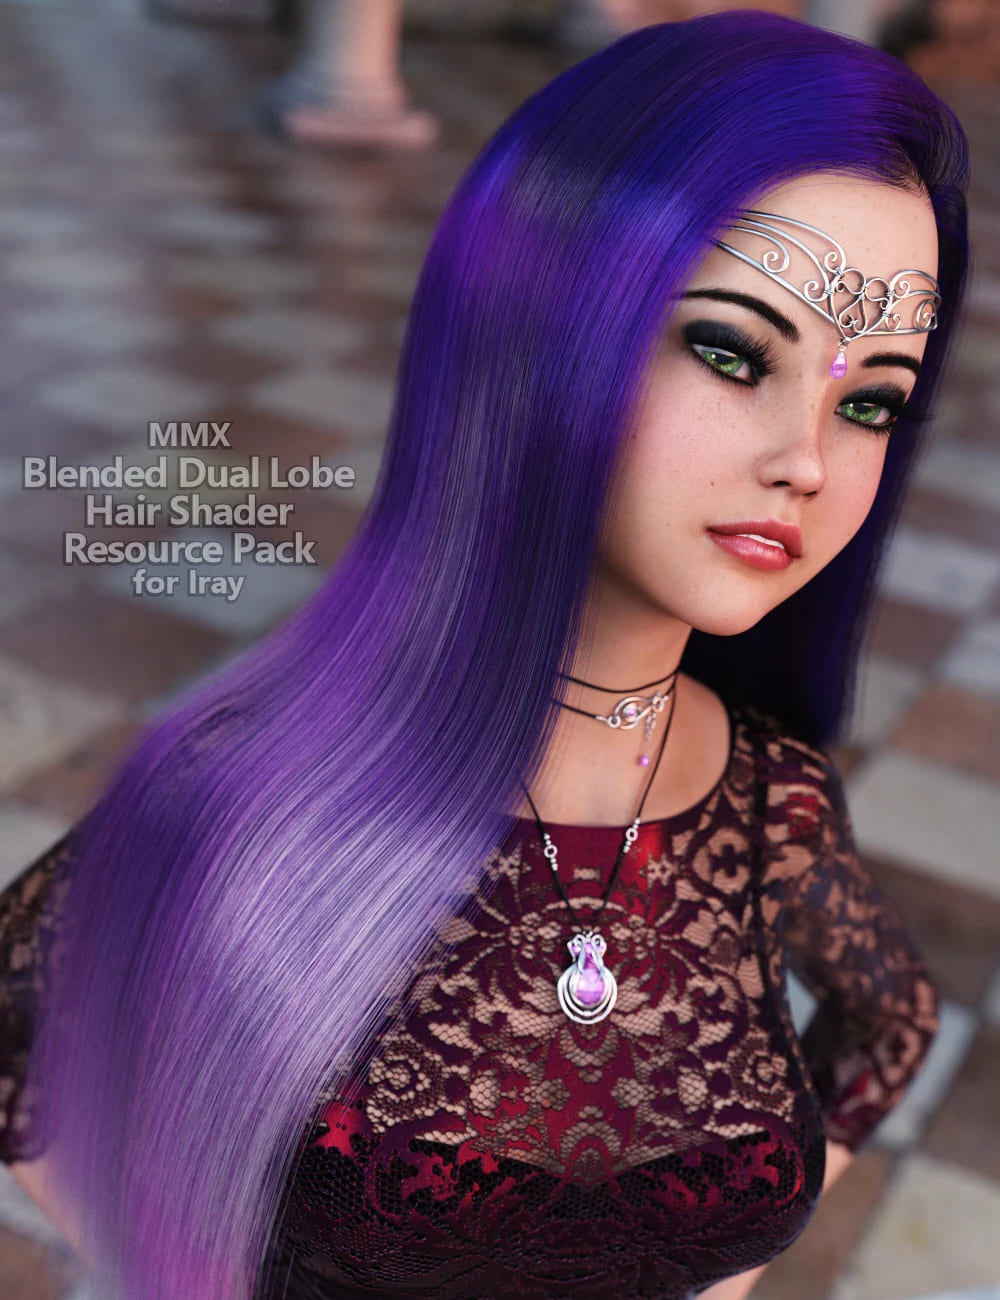 MMX Blended Dual Lobe Hair Shader Resource Pack for Iray_DAZ3DDL